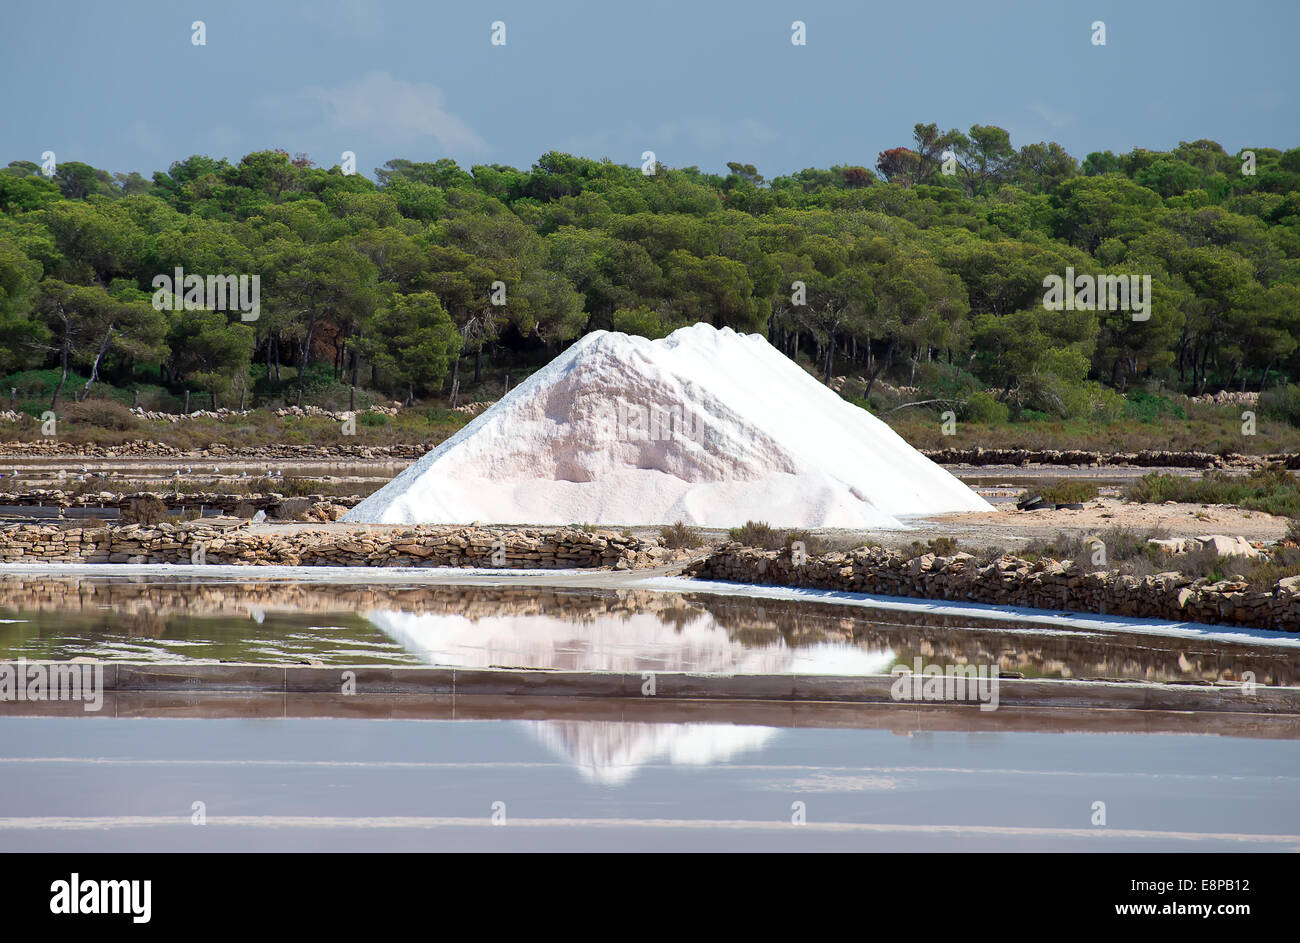 Download Sea Salt Production High Resolution Stock Photography And Images Alamy Yellowimages Mockups